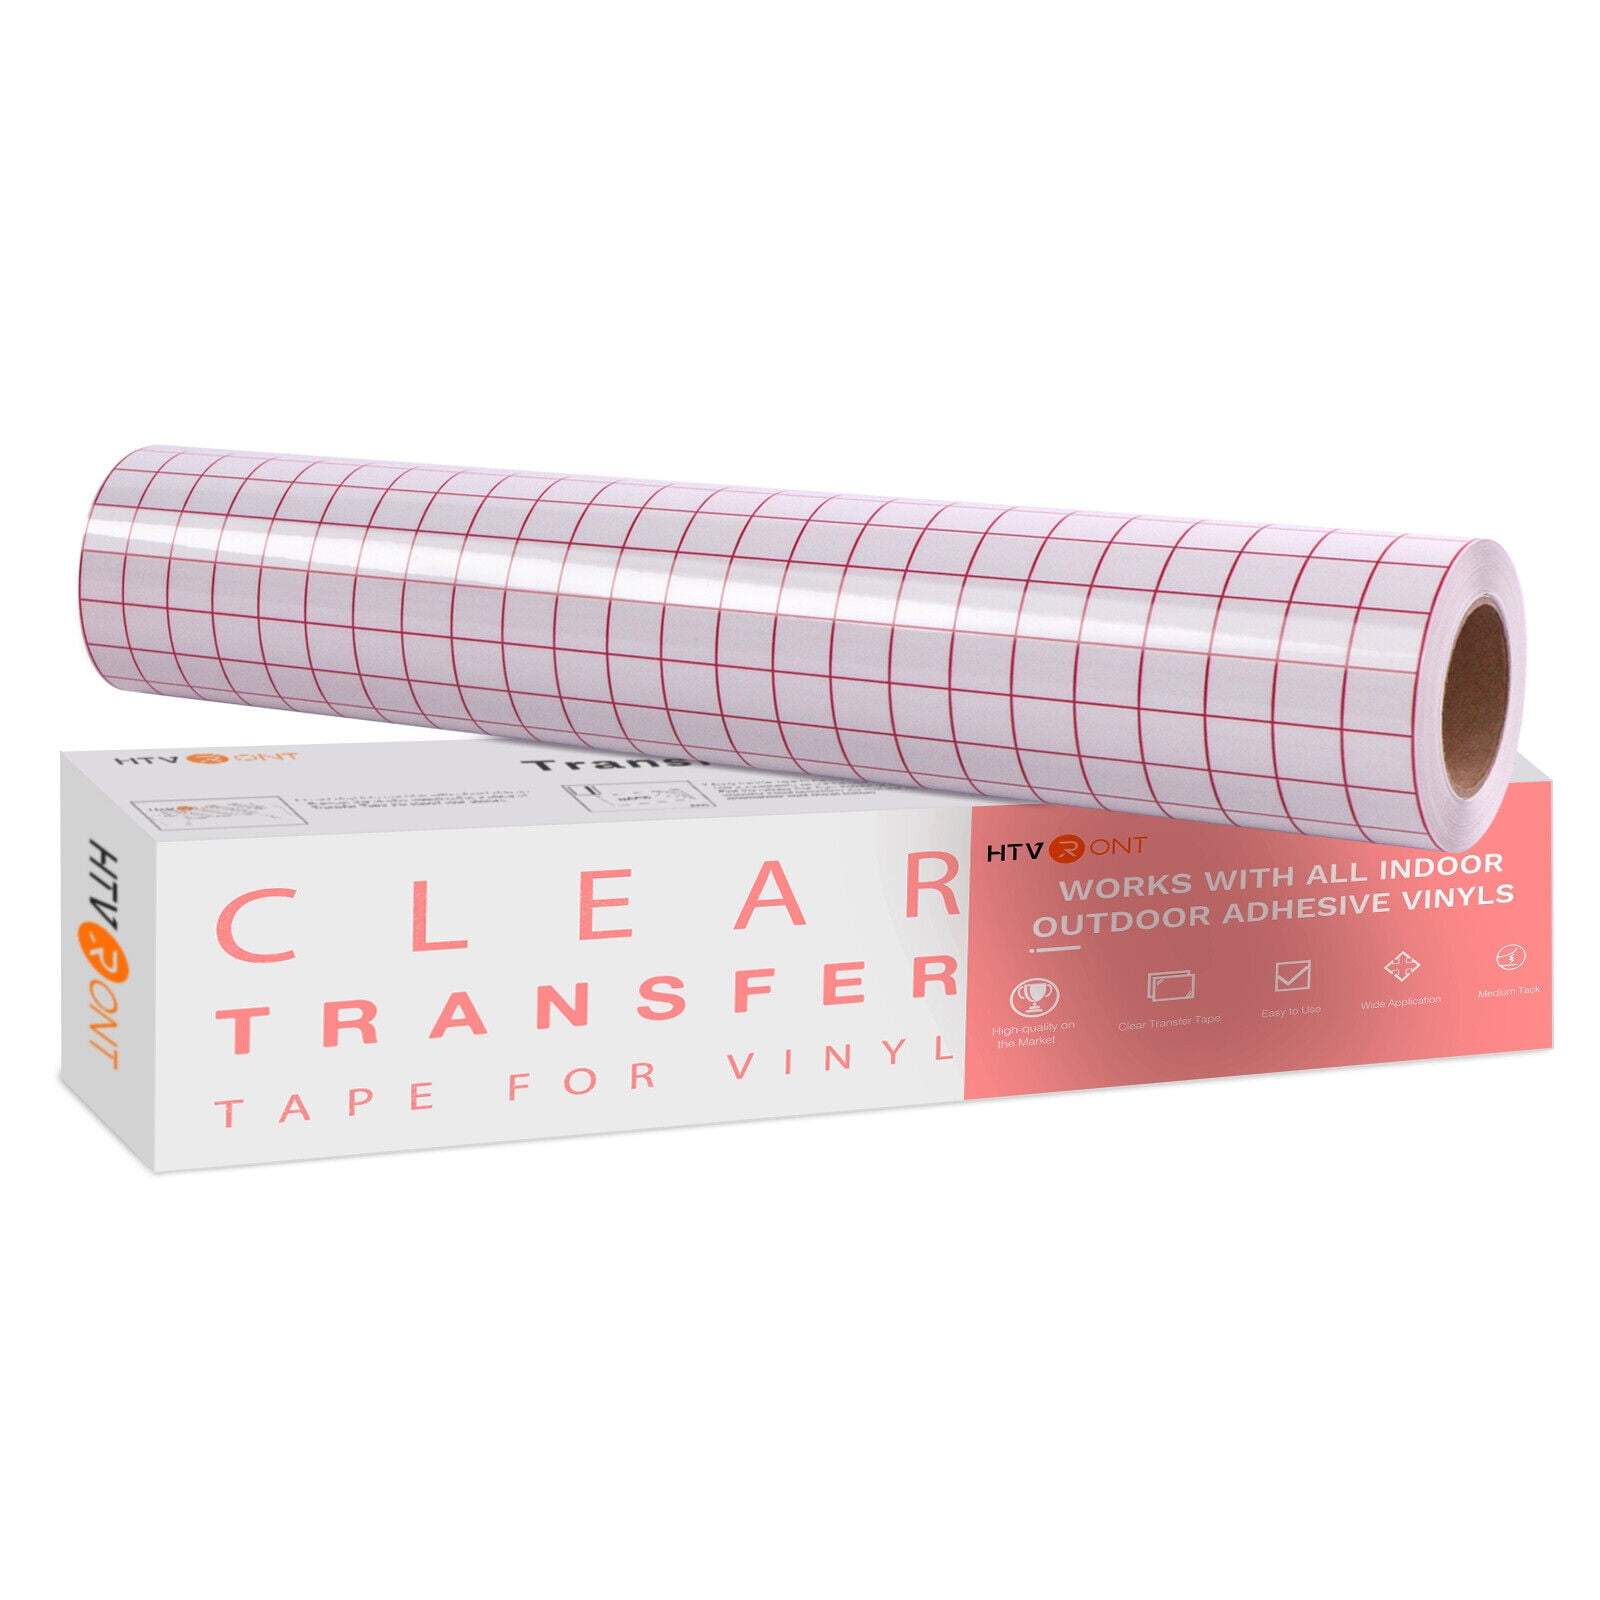 Transfer Tape for Vinyl, 24 inch x 100 Feet, Clear Film with Medium-High Tack Adhesive. American-Made Application Tape for Vinyl Graphics